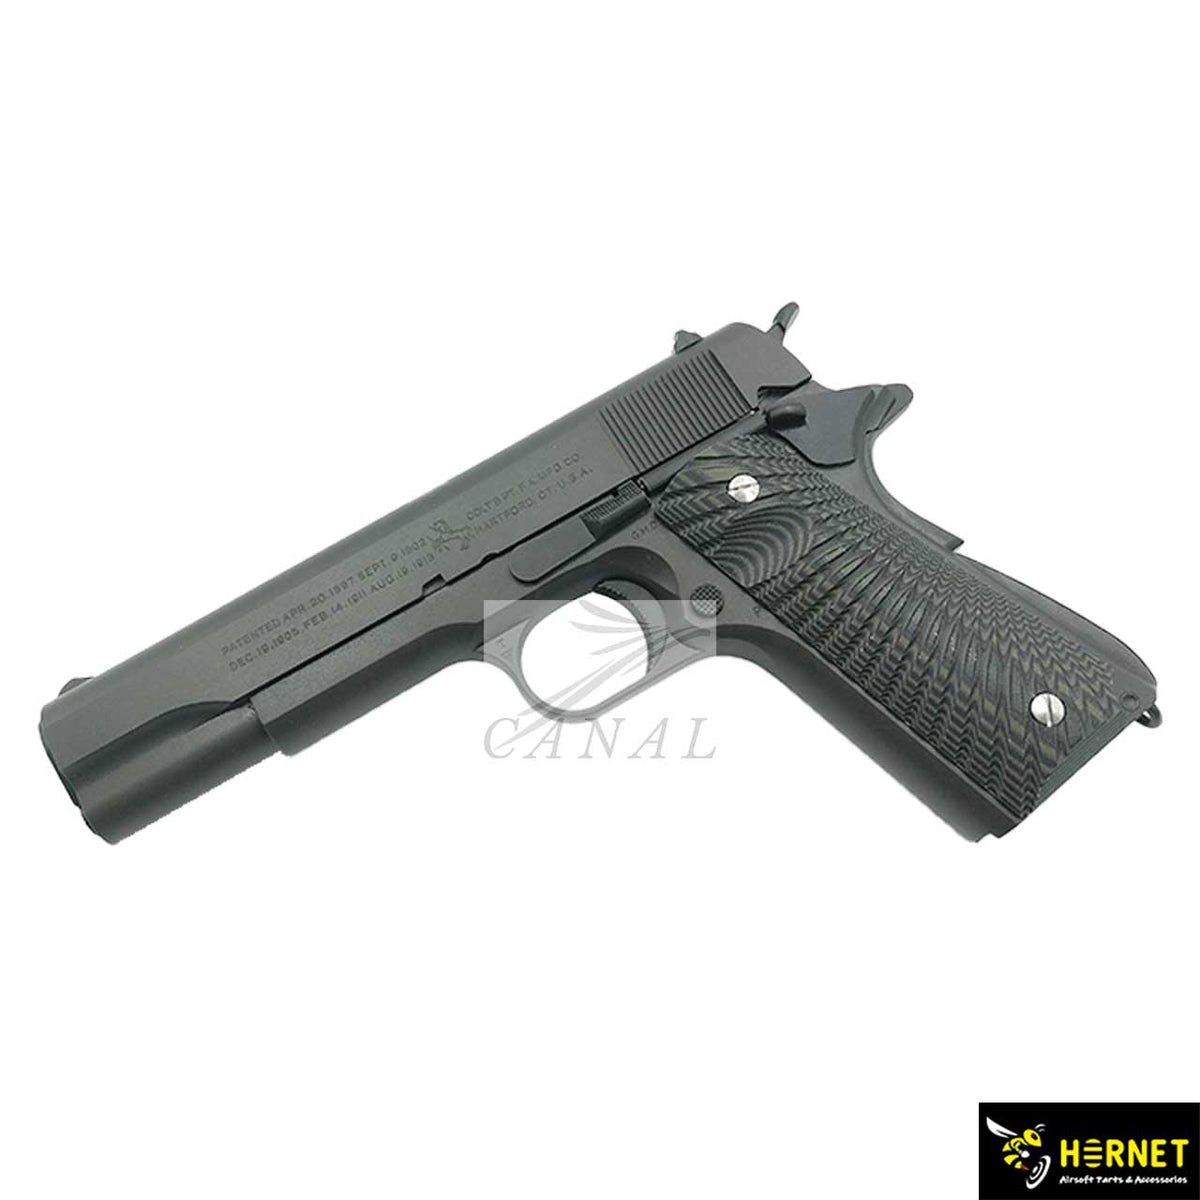 Hornet] M1911 フルサイズ G10 グリップ -Eagle Wing Texture – Canal